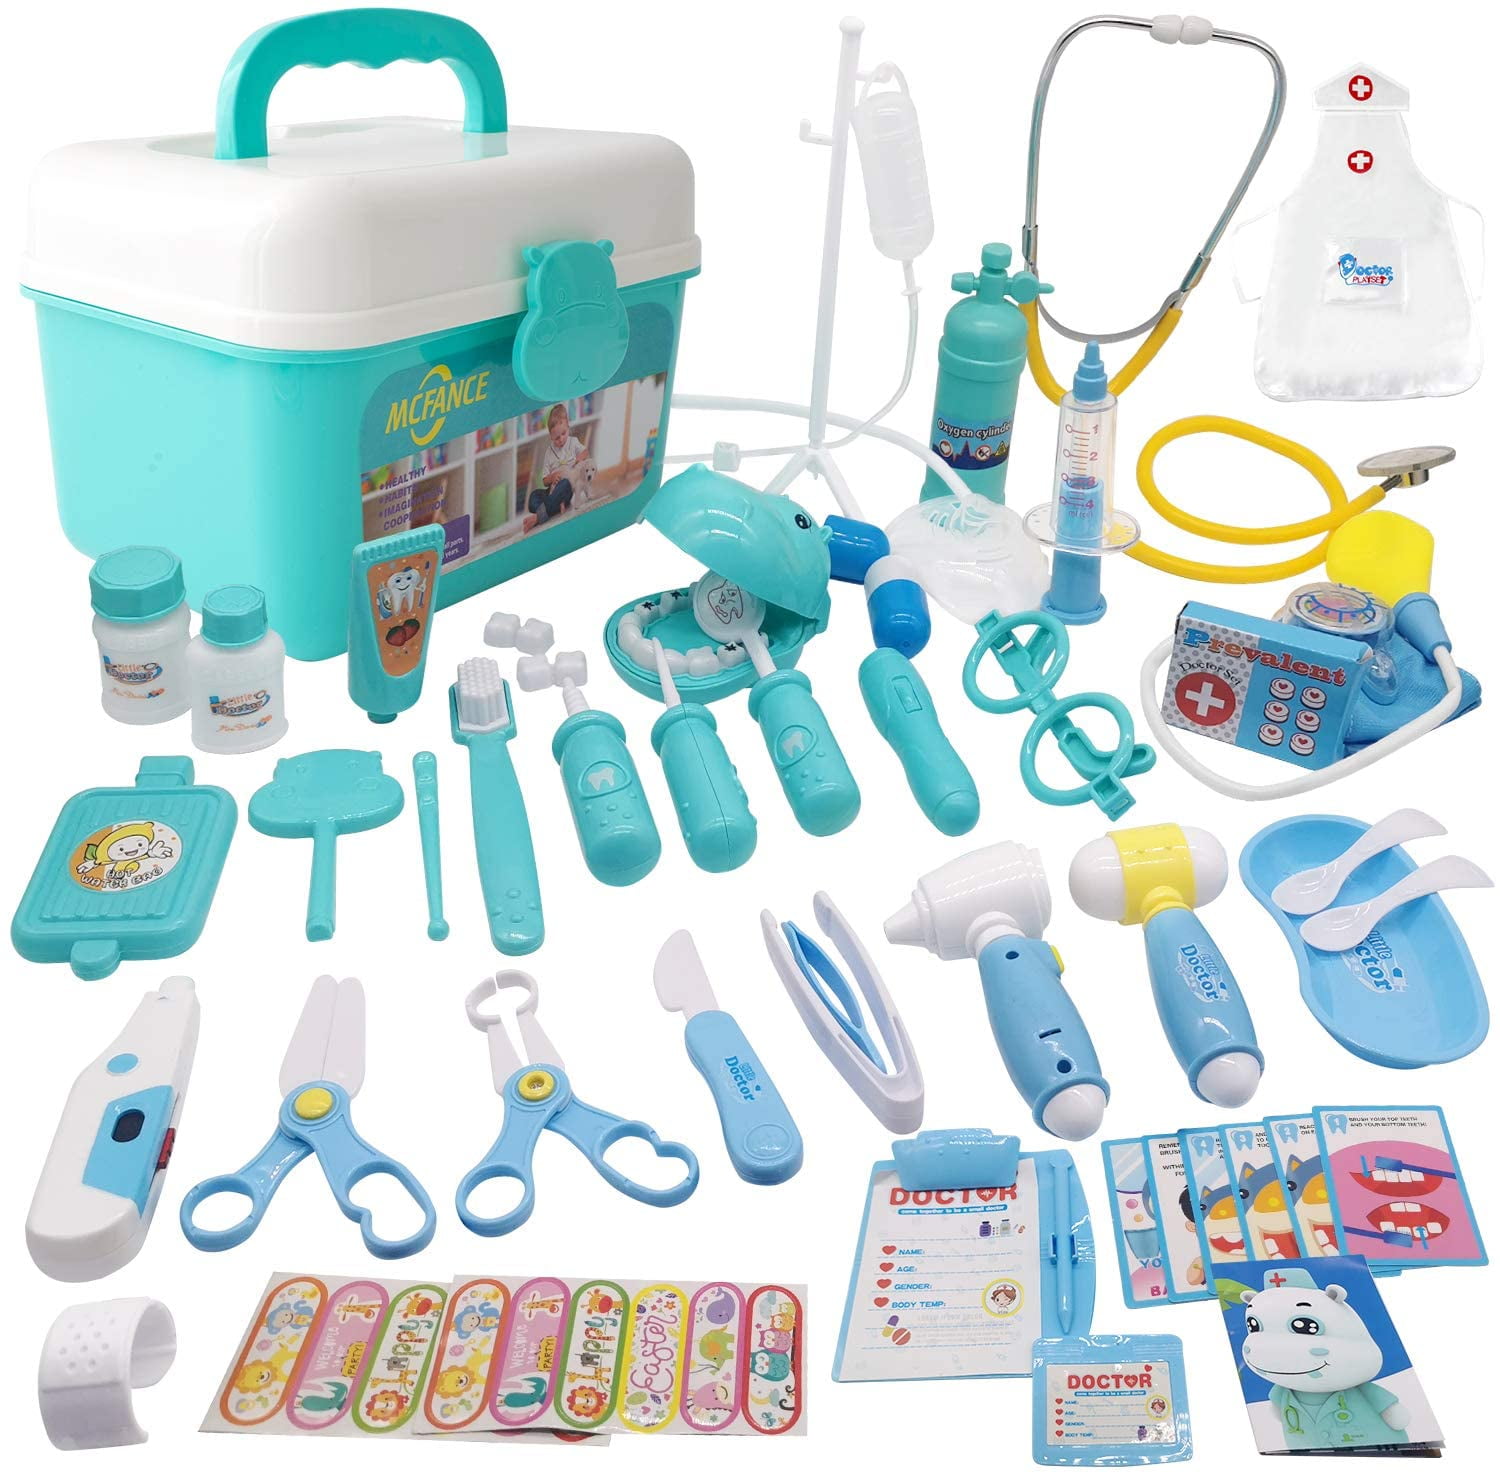 Kids doctor kit • Compare (53 products) see prices »